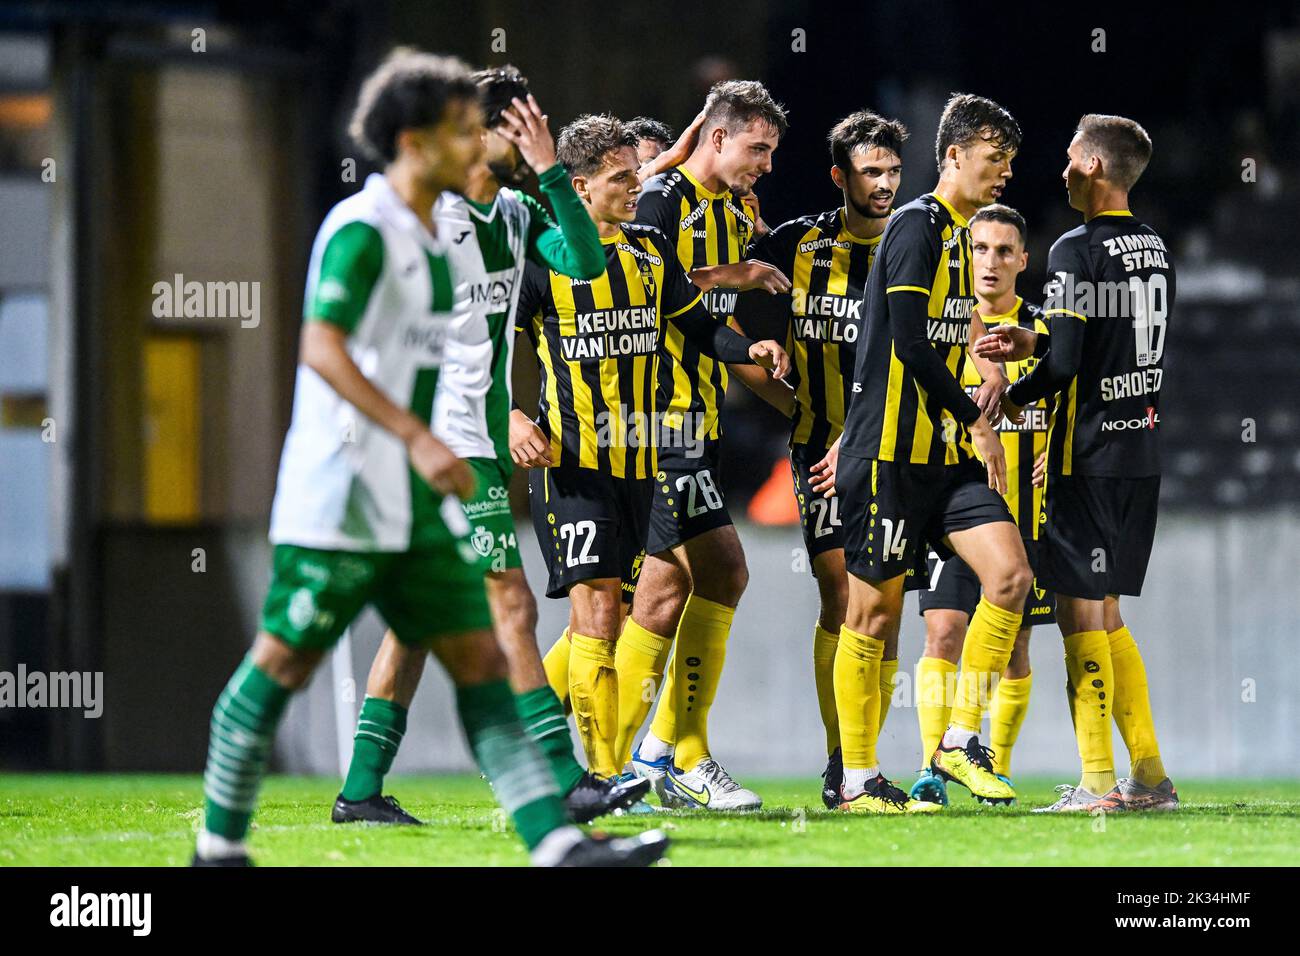 Lierse's Toon Raemaekers celebrates after scoring during a soccer game between Lierse Kempenzonen and Koninklijke Racing Club Mechelen, Saturday 24 September 2022 in Lier, in the fifth round of the 'Croky Cup' Belgian cup. BELGA PHOTO TOM GOYVAERTS Stock Photo